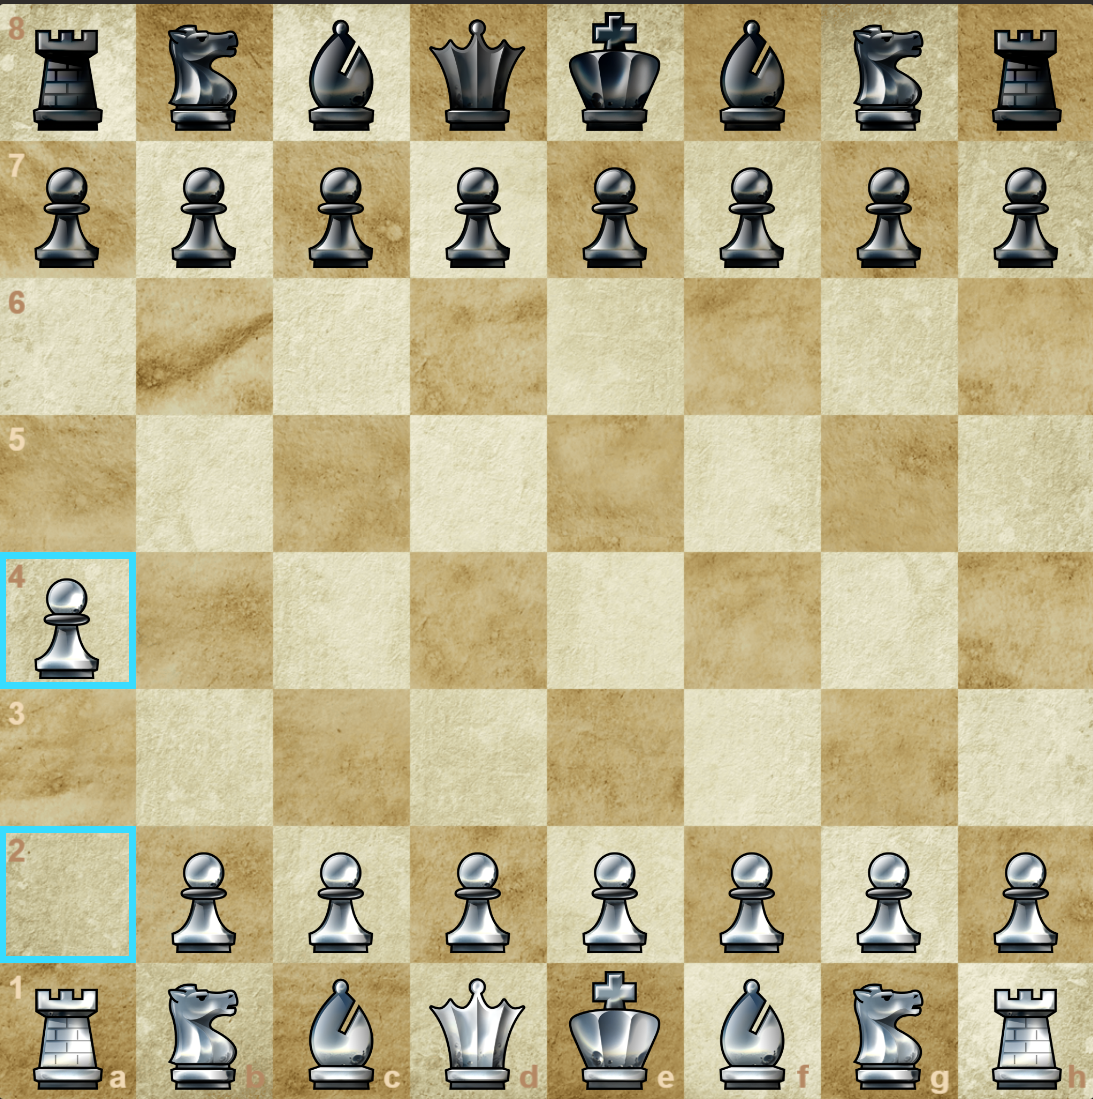 King's Gambit for Black Part 1: PGN + Games